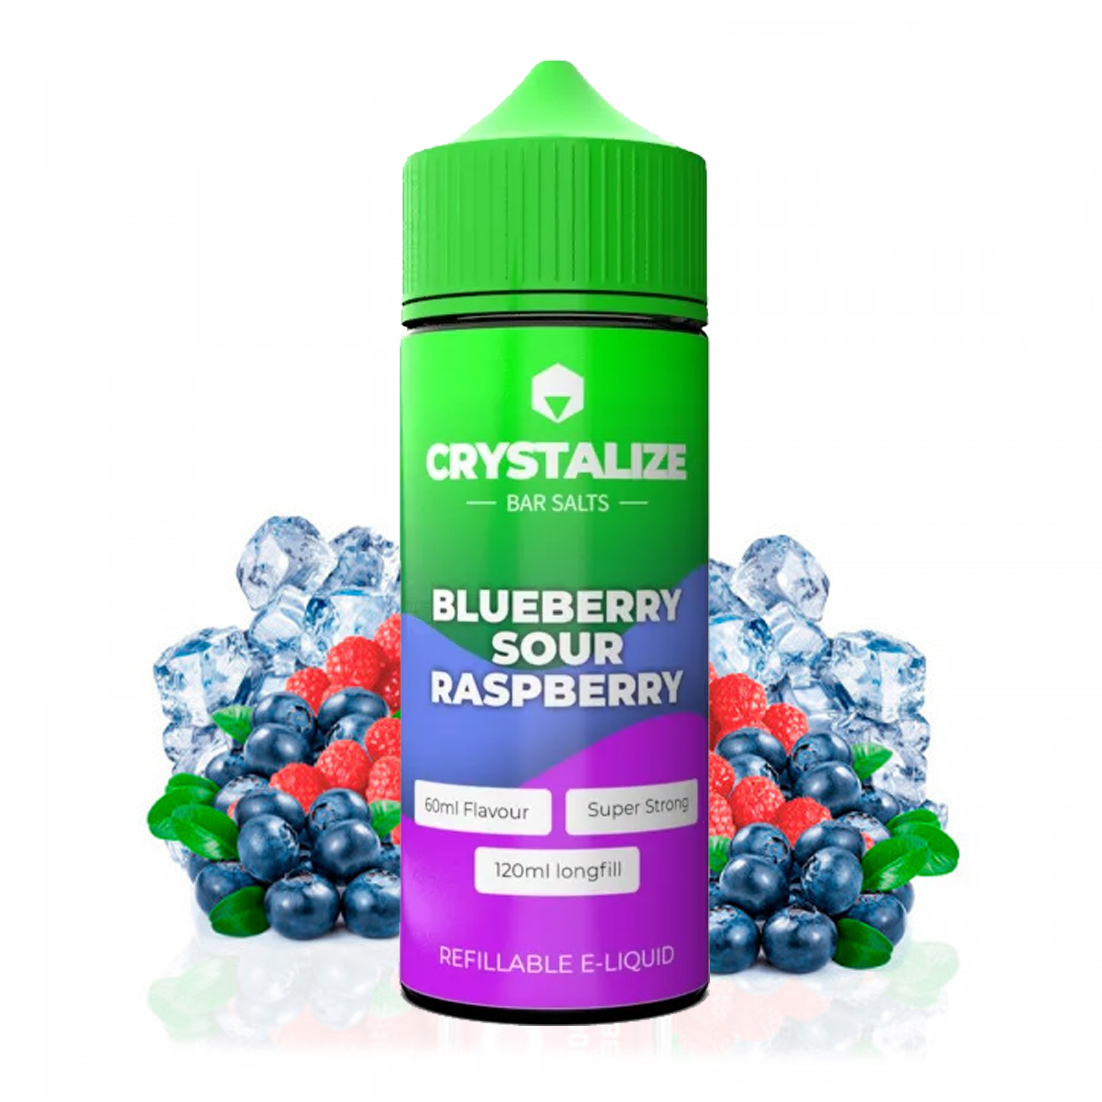 Crystalize - Blueberry Sour Raspberry 100ml Longfill